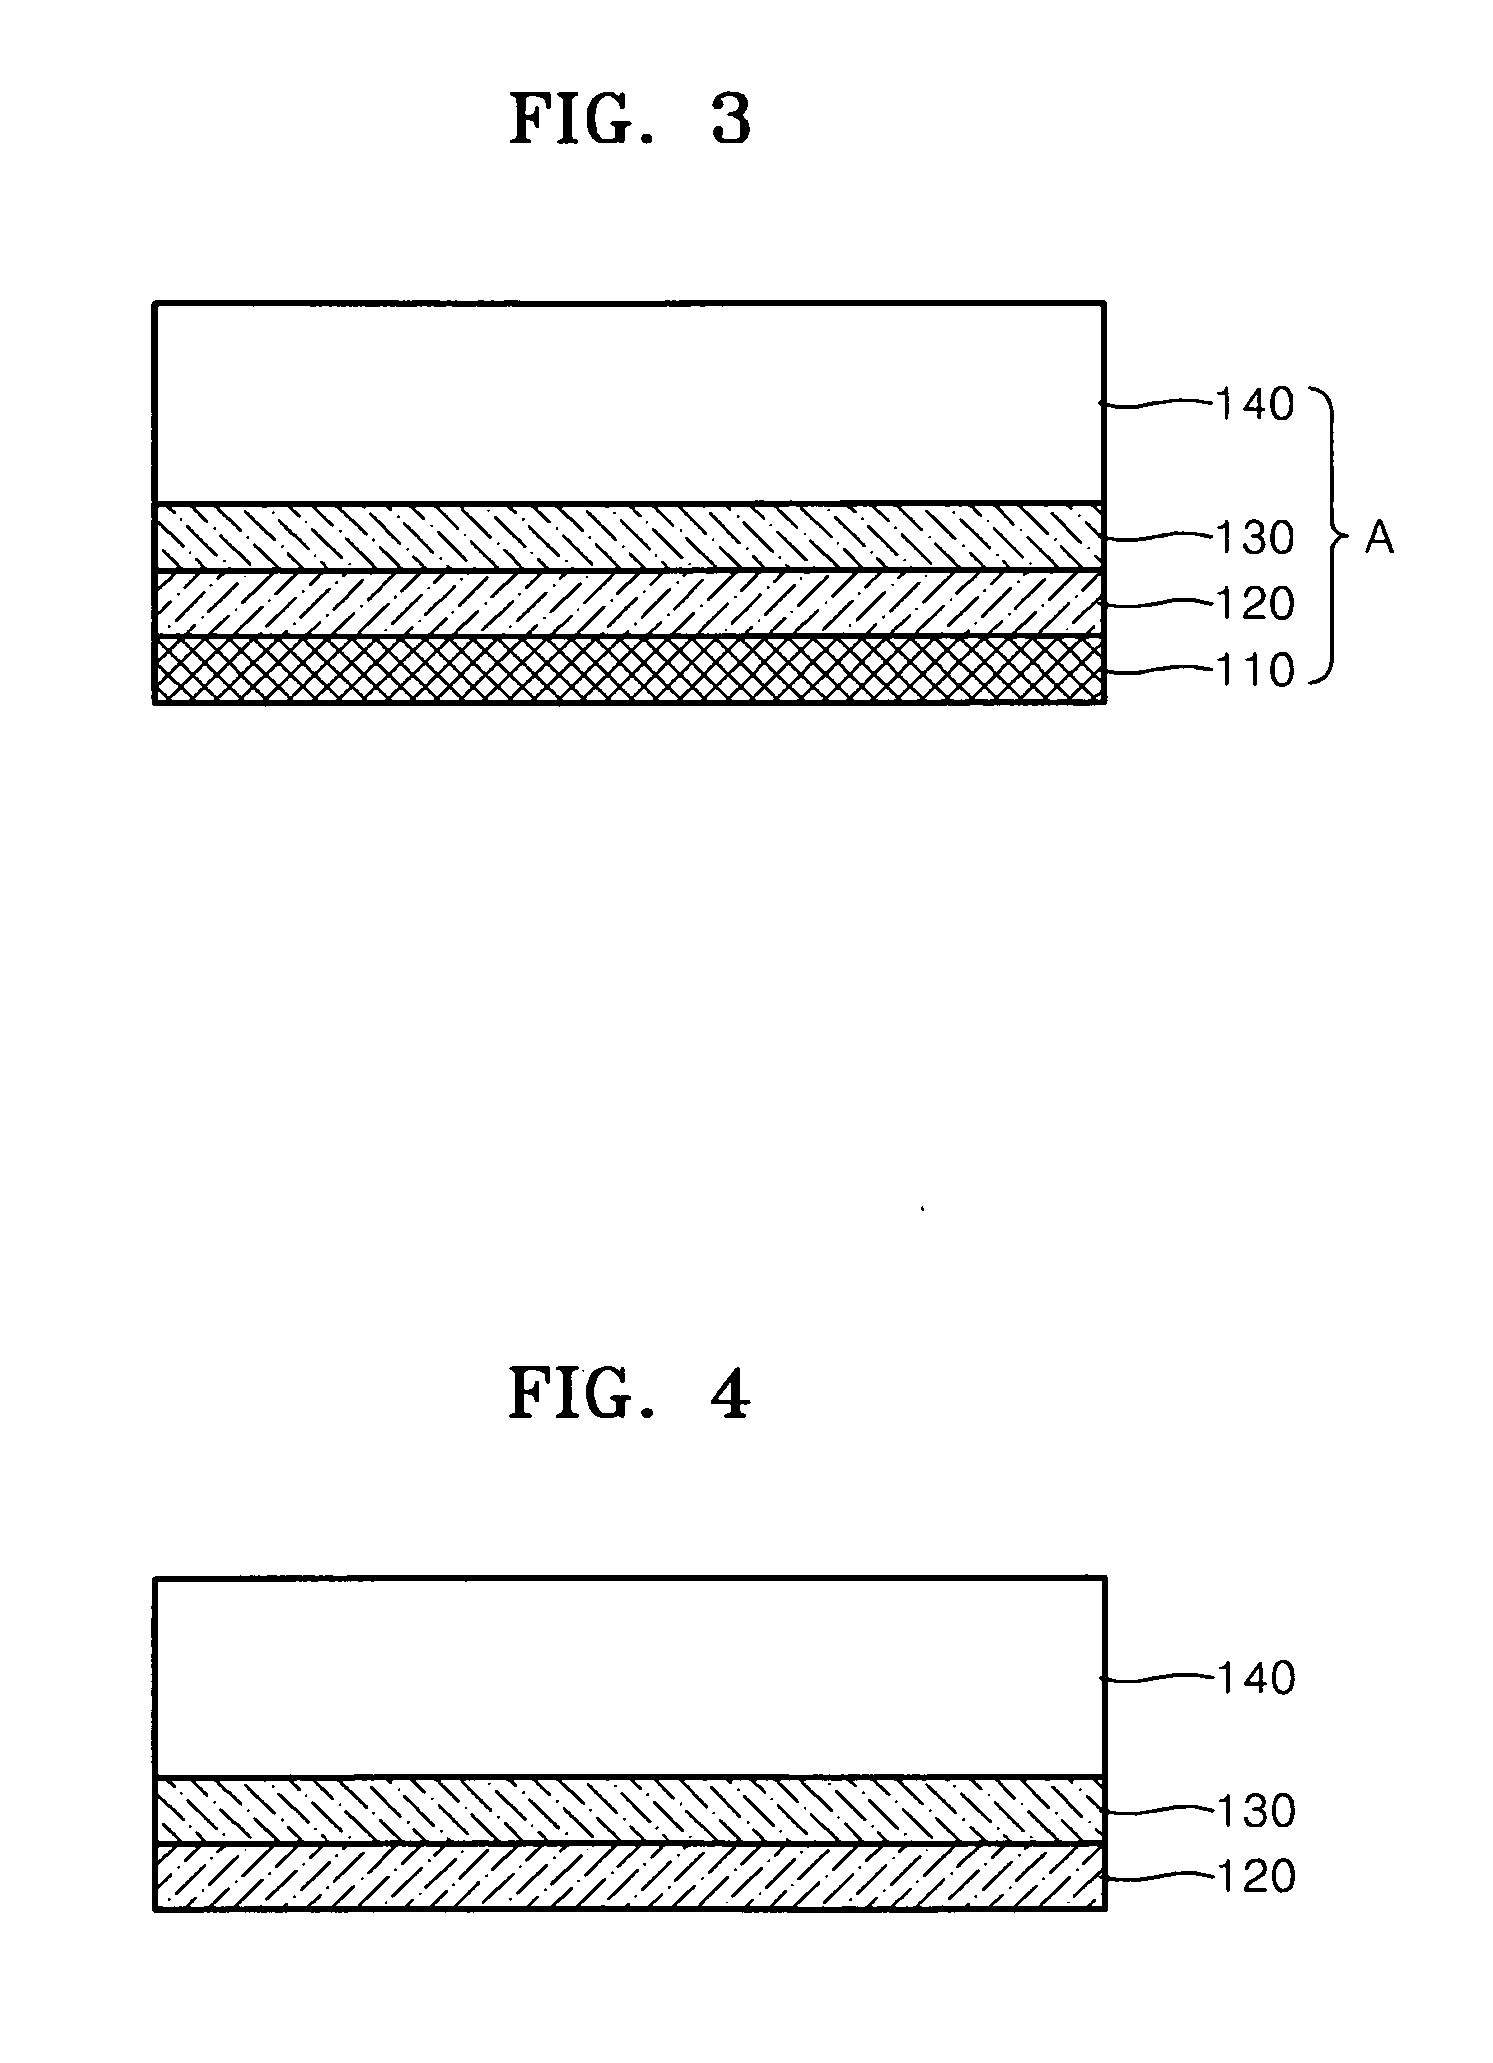 Methods of manufacturing and transferring larger-sized graphene